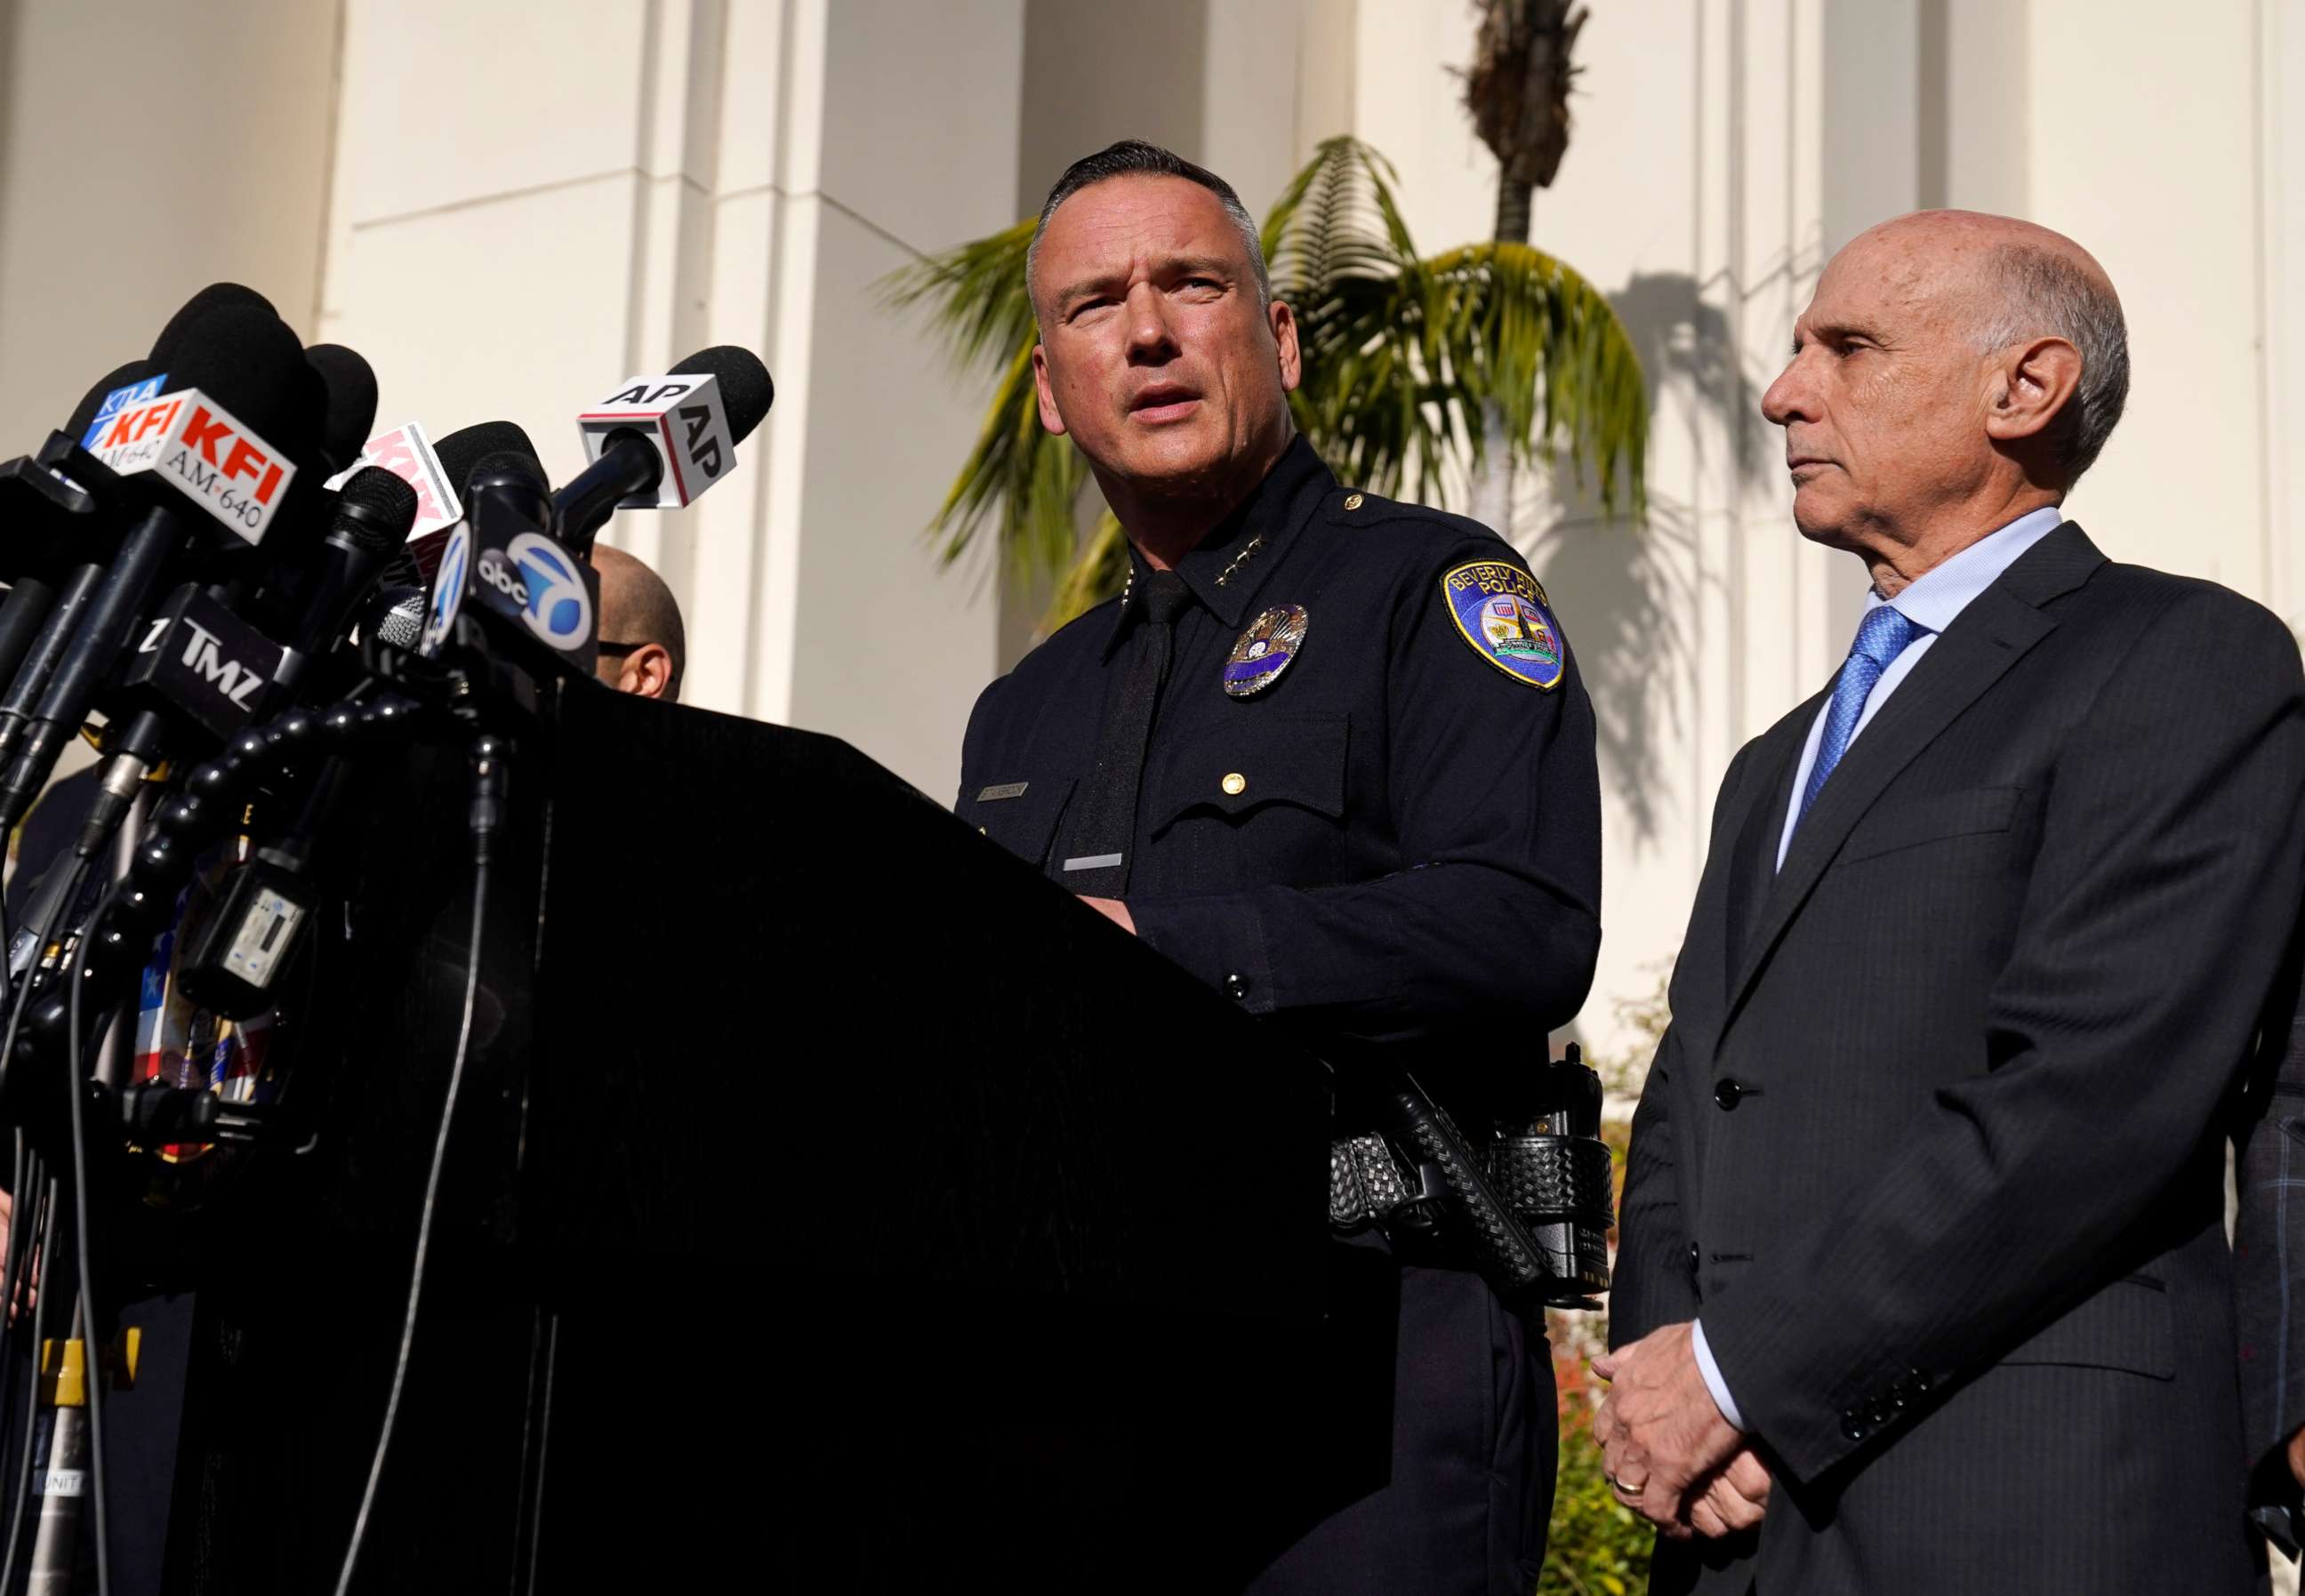 PHOTO: Beverly Hills Police Chief Mark G. Stainbrook, left, addresses the media as Mayor Robert Wunderlich looks on during a news conference, Dec. 1, 2021, in Beverly Hills, Calif.